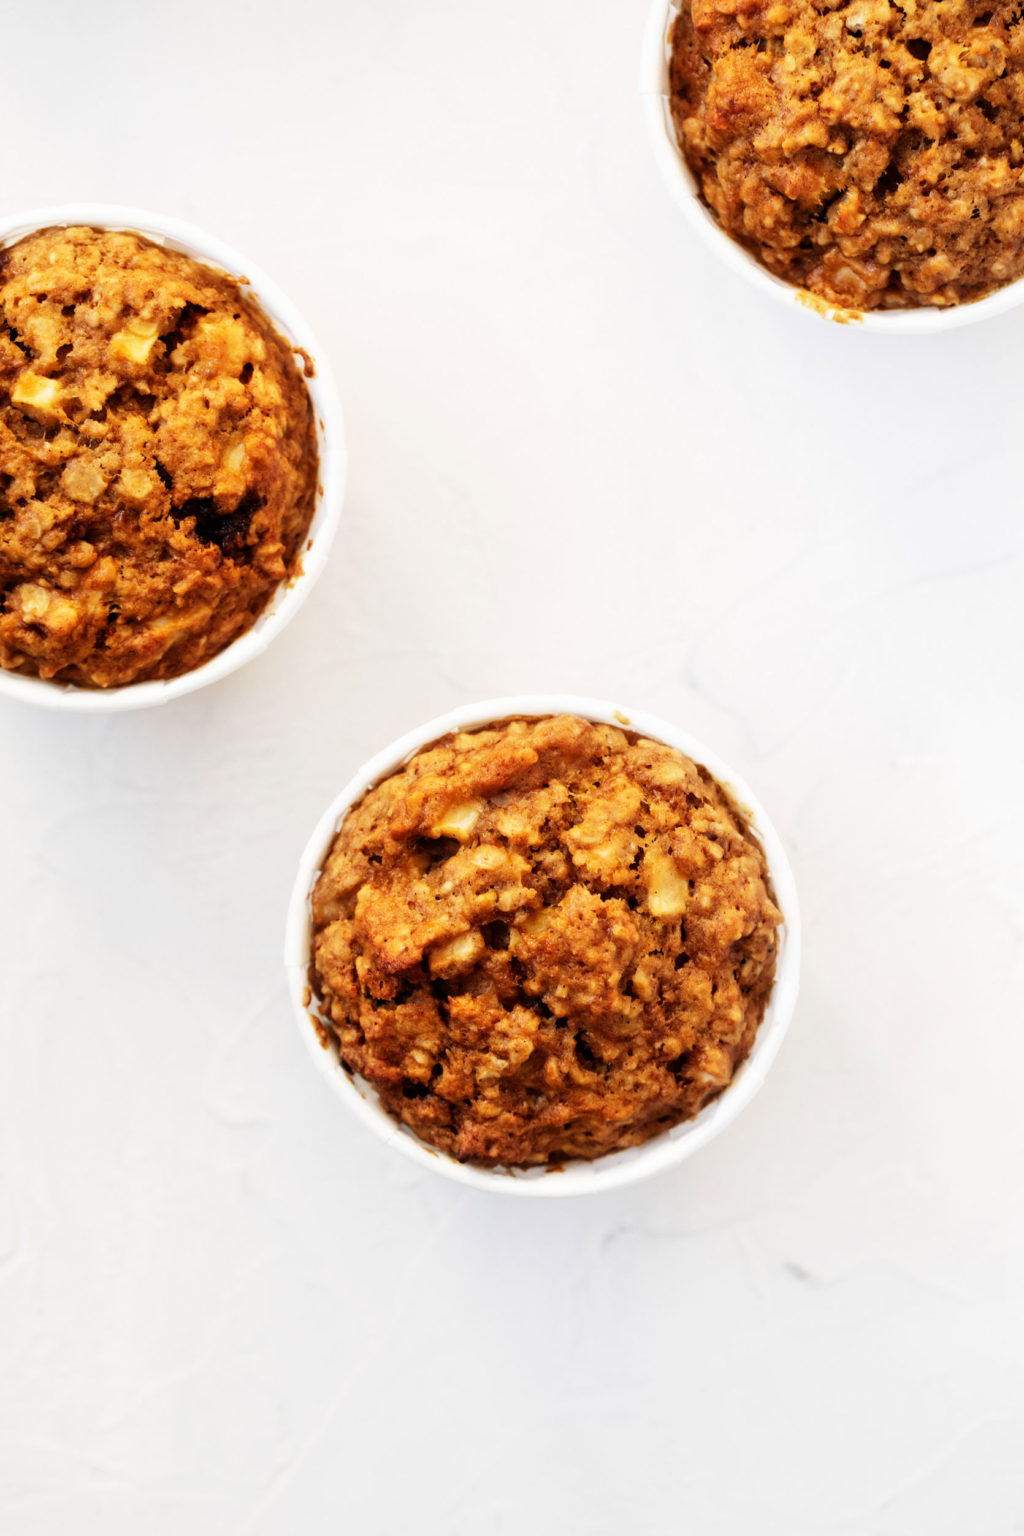 A few whole grain vegan muffins are resting on a white surface. Each is wrapped in a white liner.